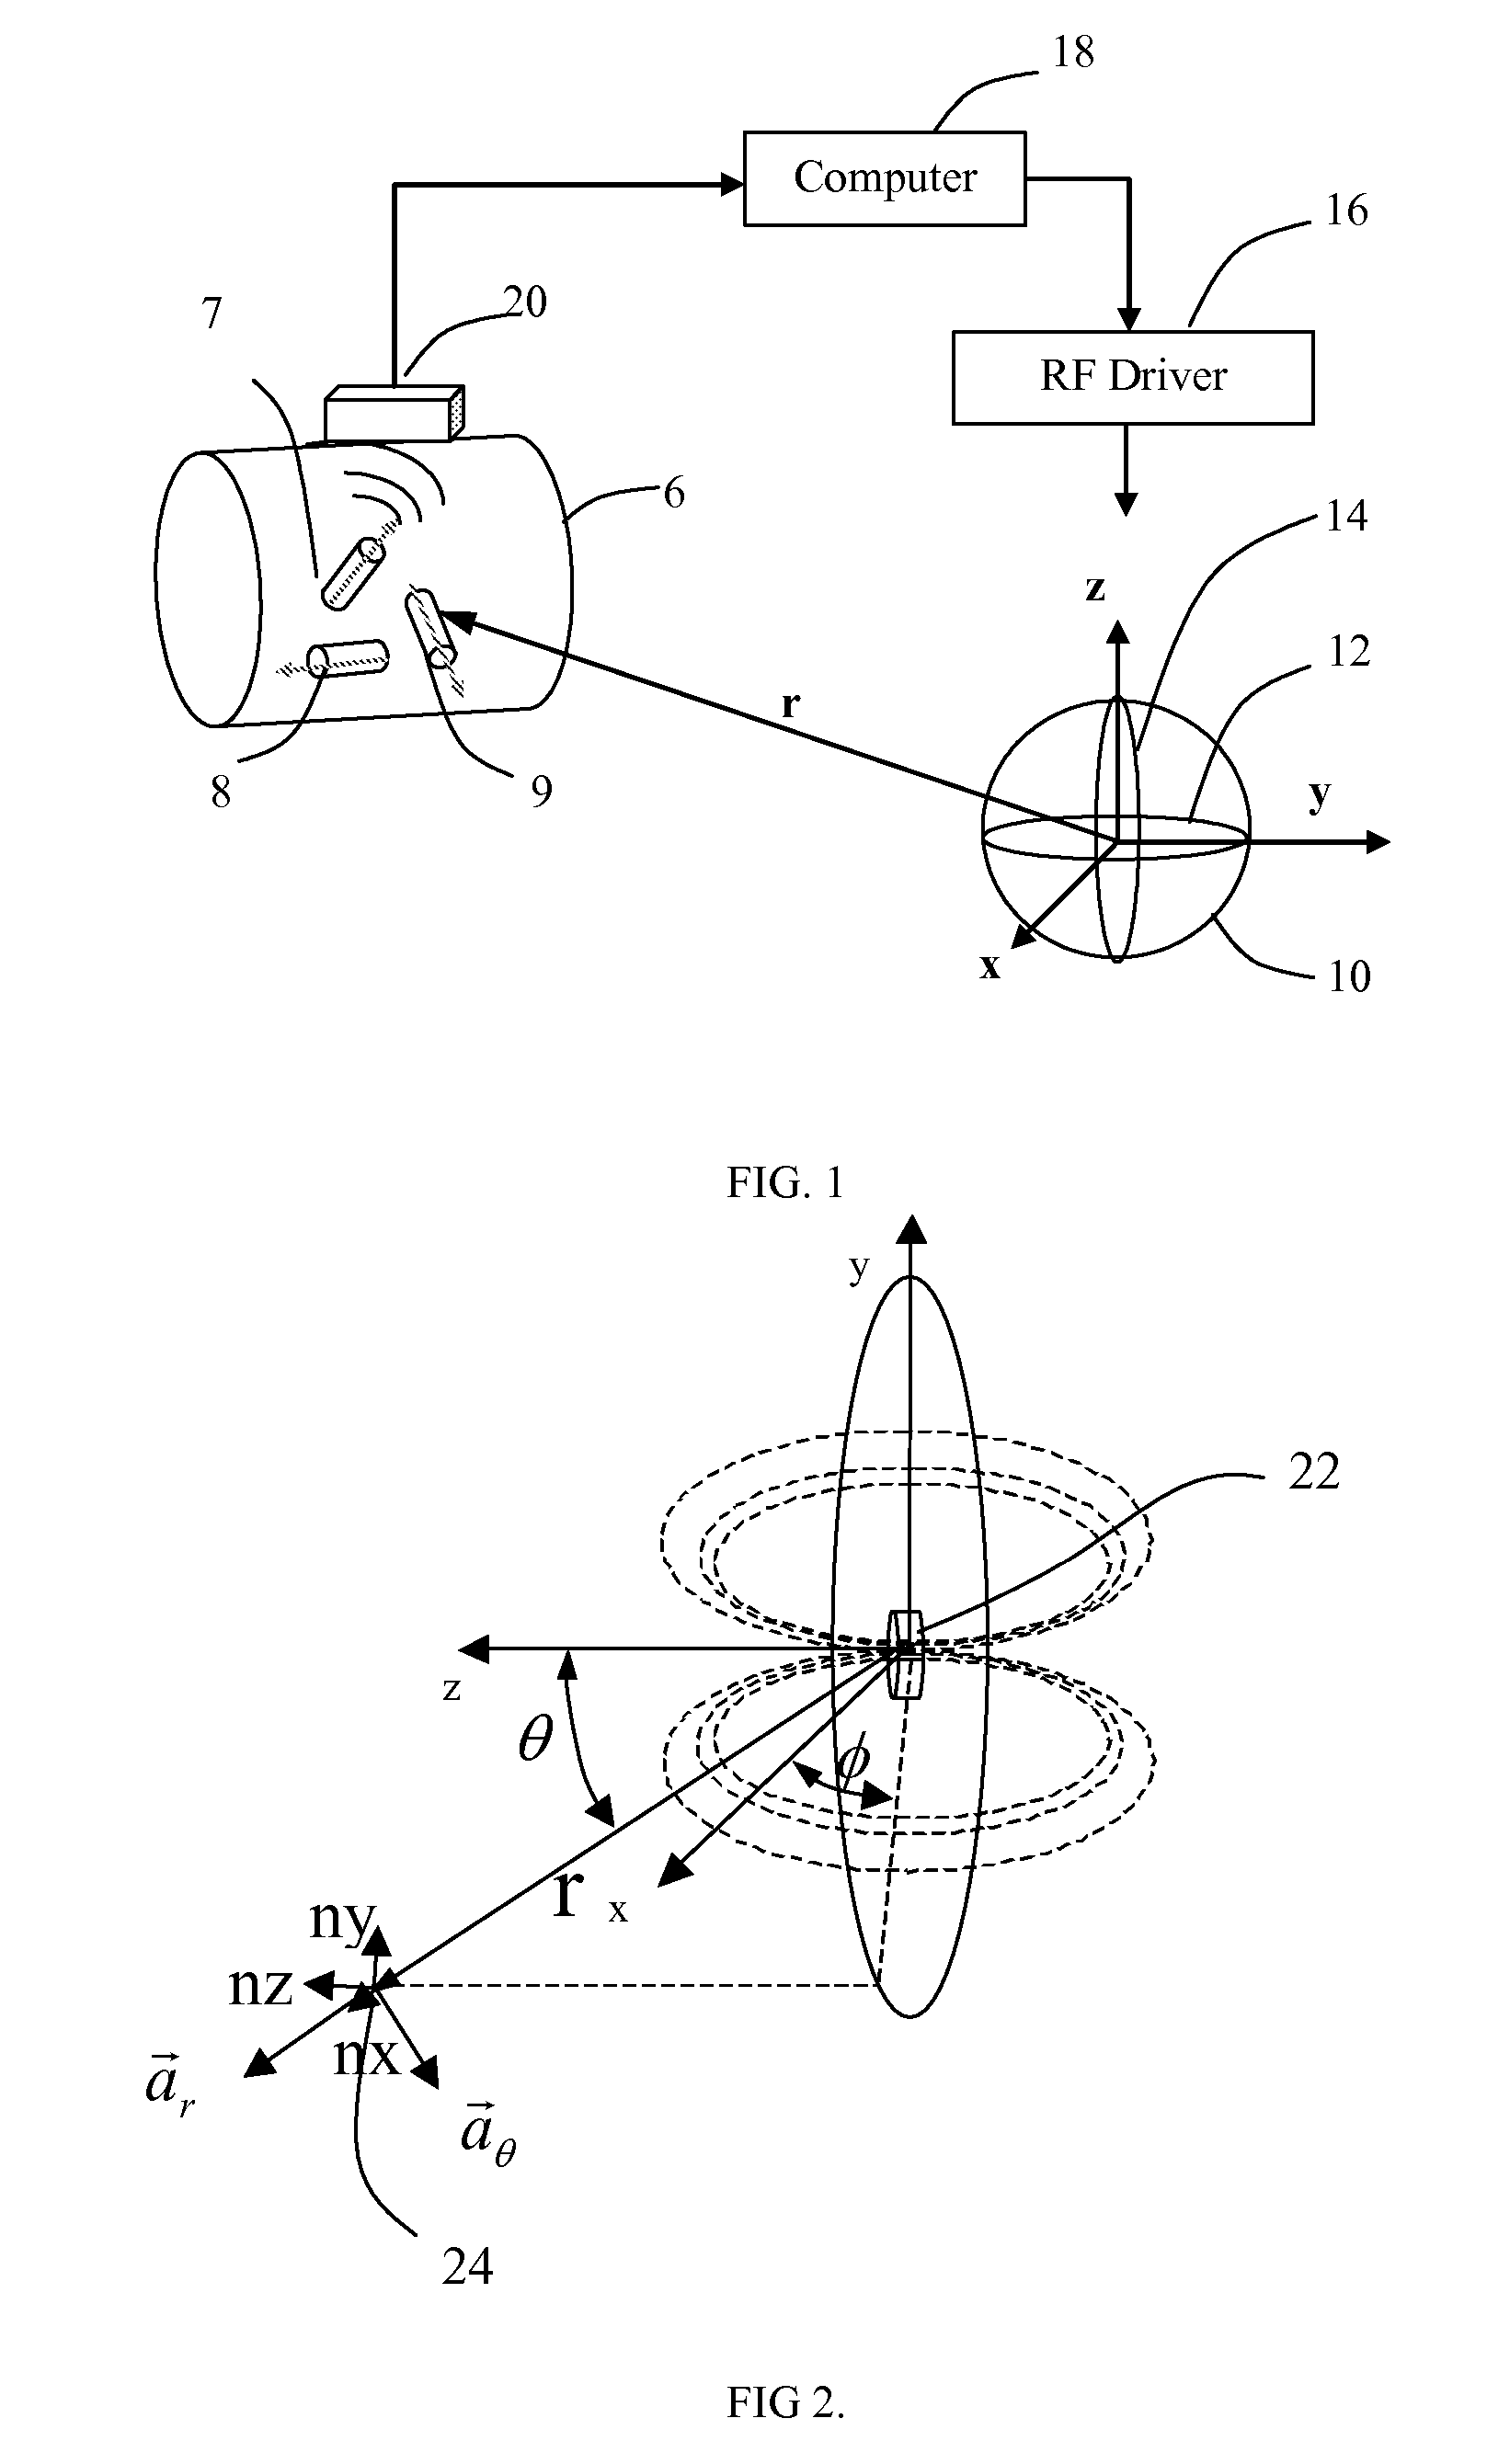 Method and Apparatus for Detecting Object Orientation and Position